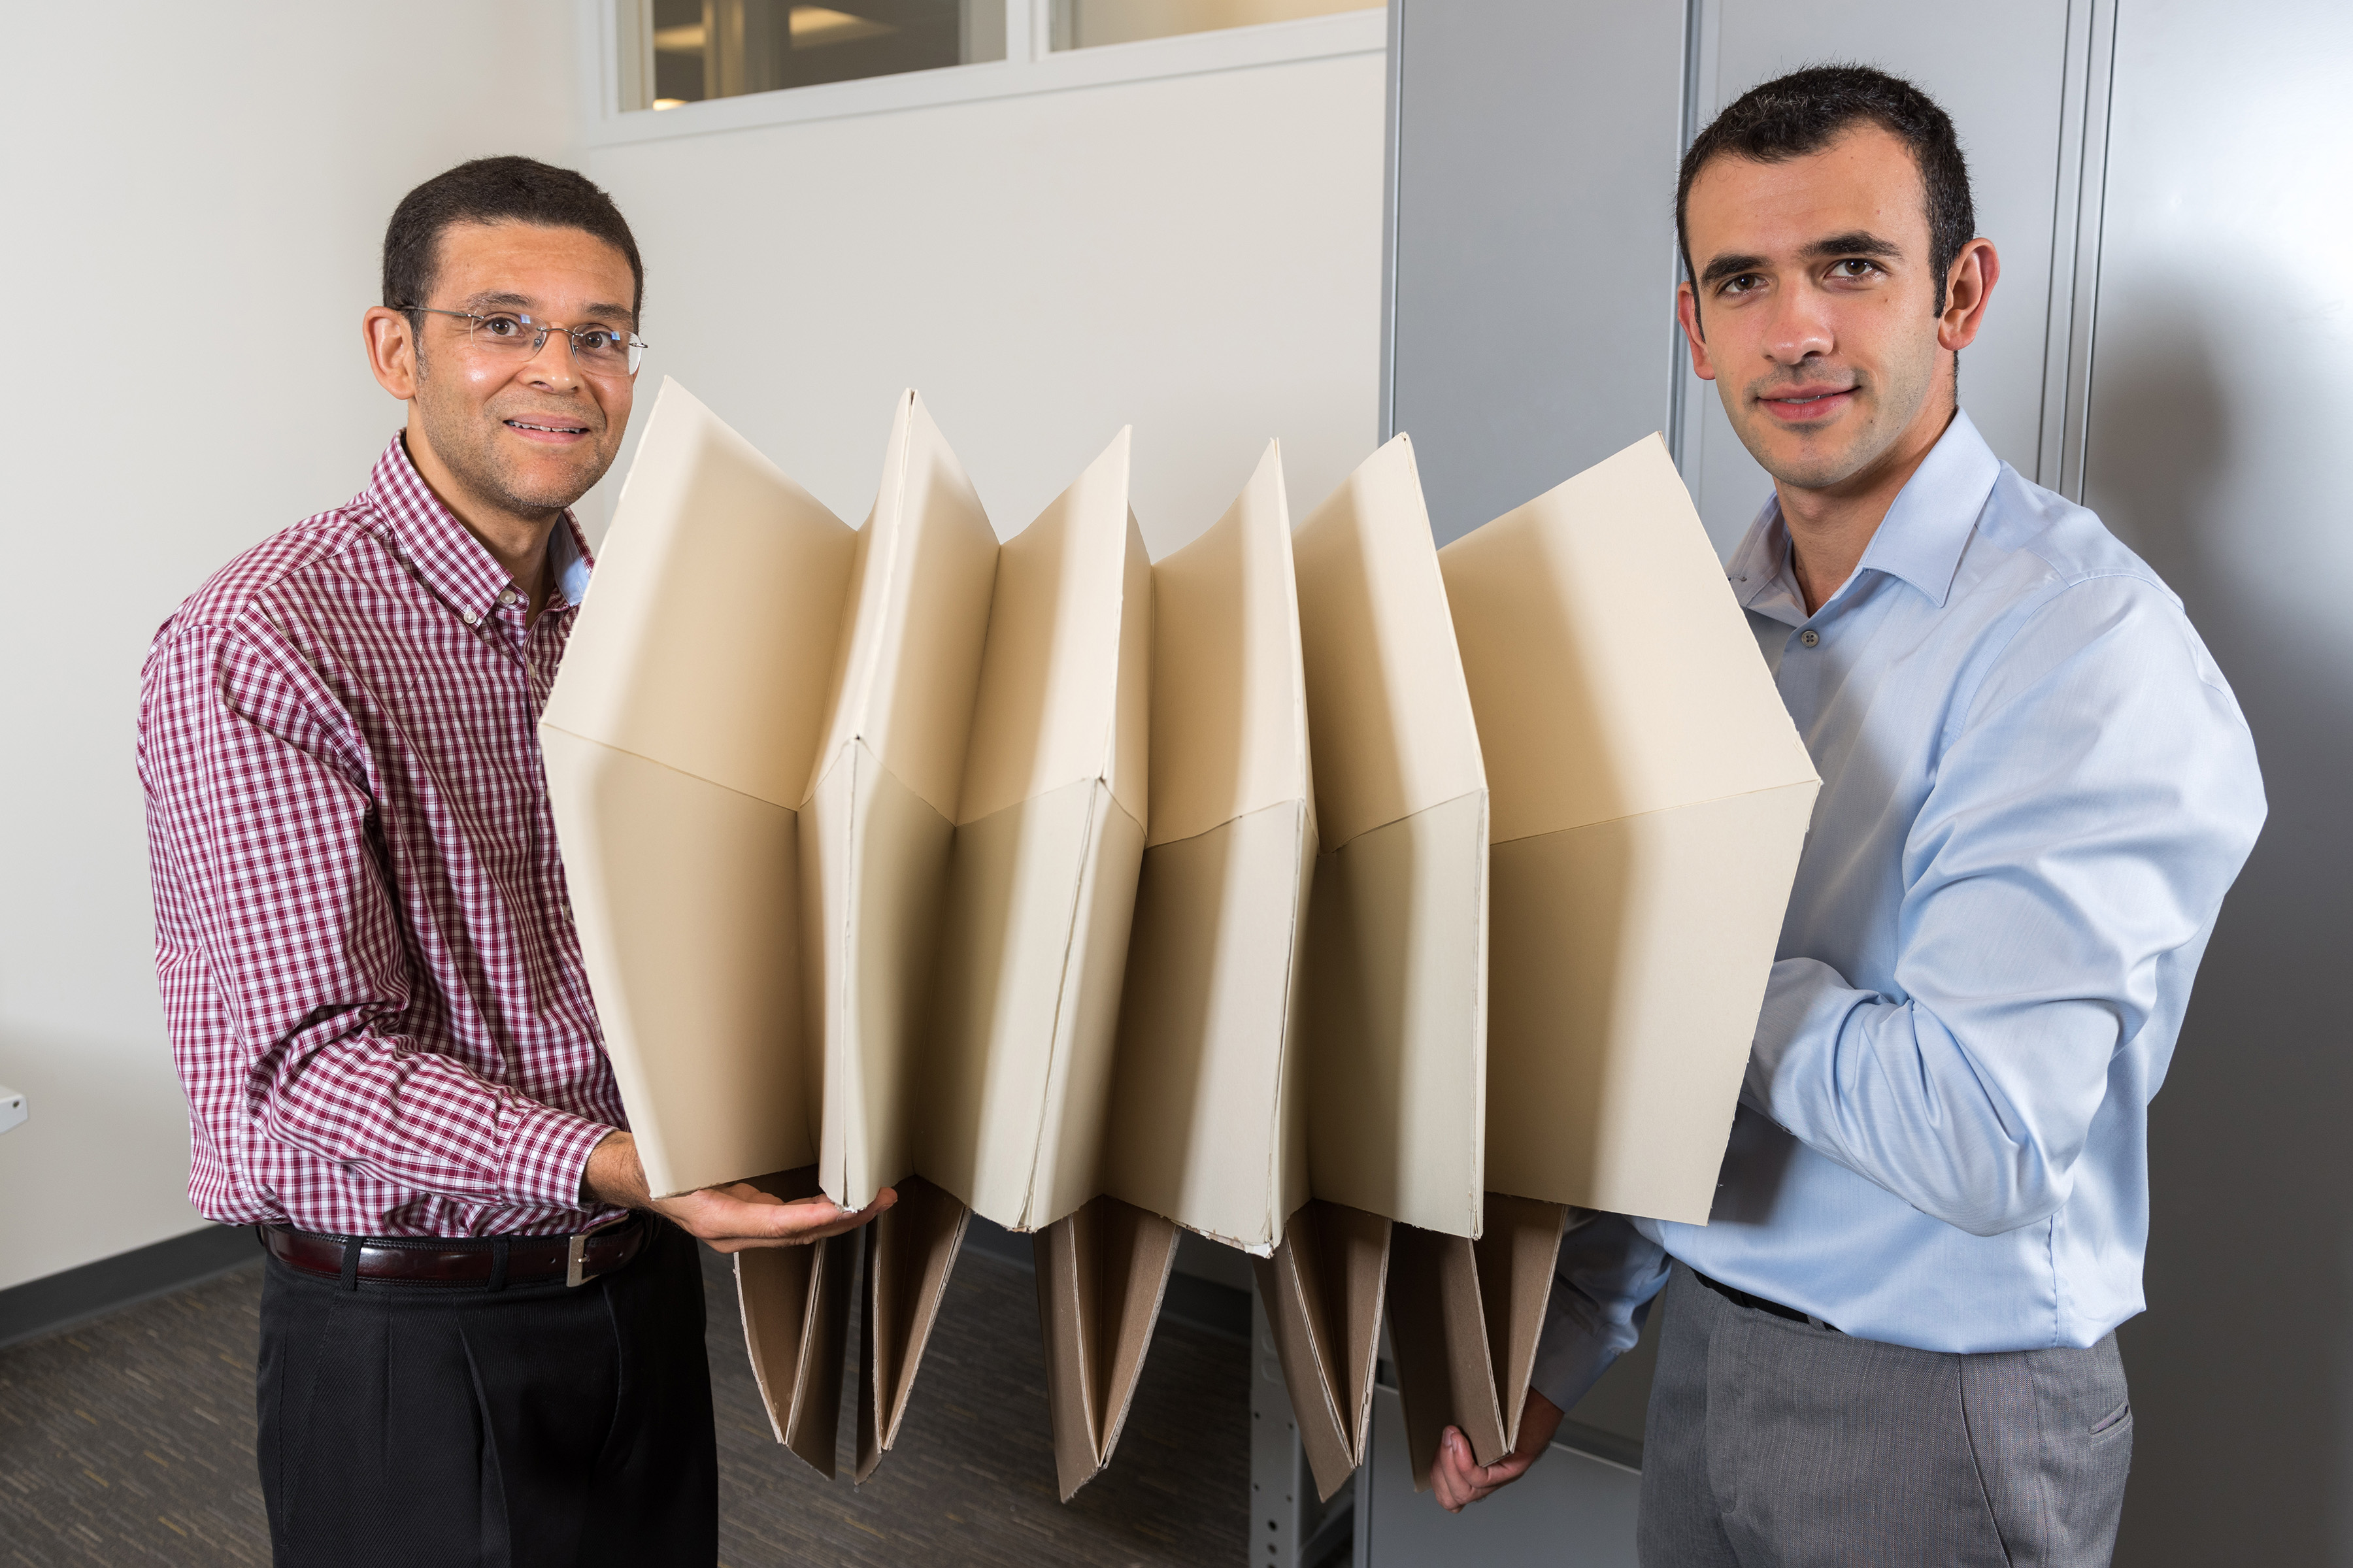 Researchers Glaucio Paulino (left) and Evgueni Filipov show the same large origami structure that has been folded to a much smaller space. Filipov is from University of Illinois at Urbana-Champaign; Paulino is from the Georgia Institute of Technology. (Credit: Rob Felt, Georgia Tech)